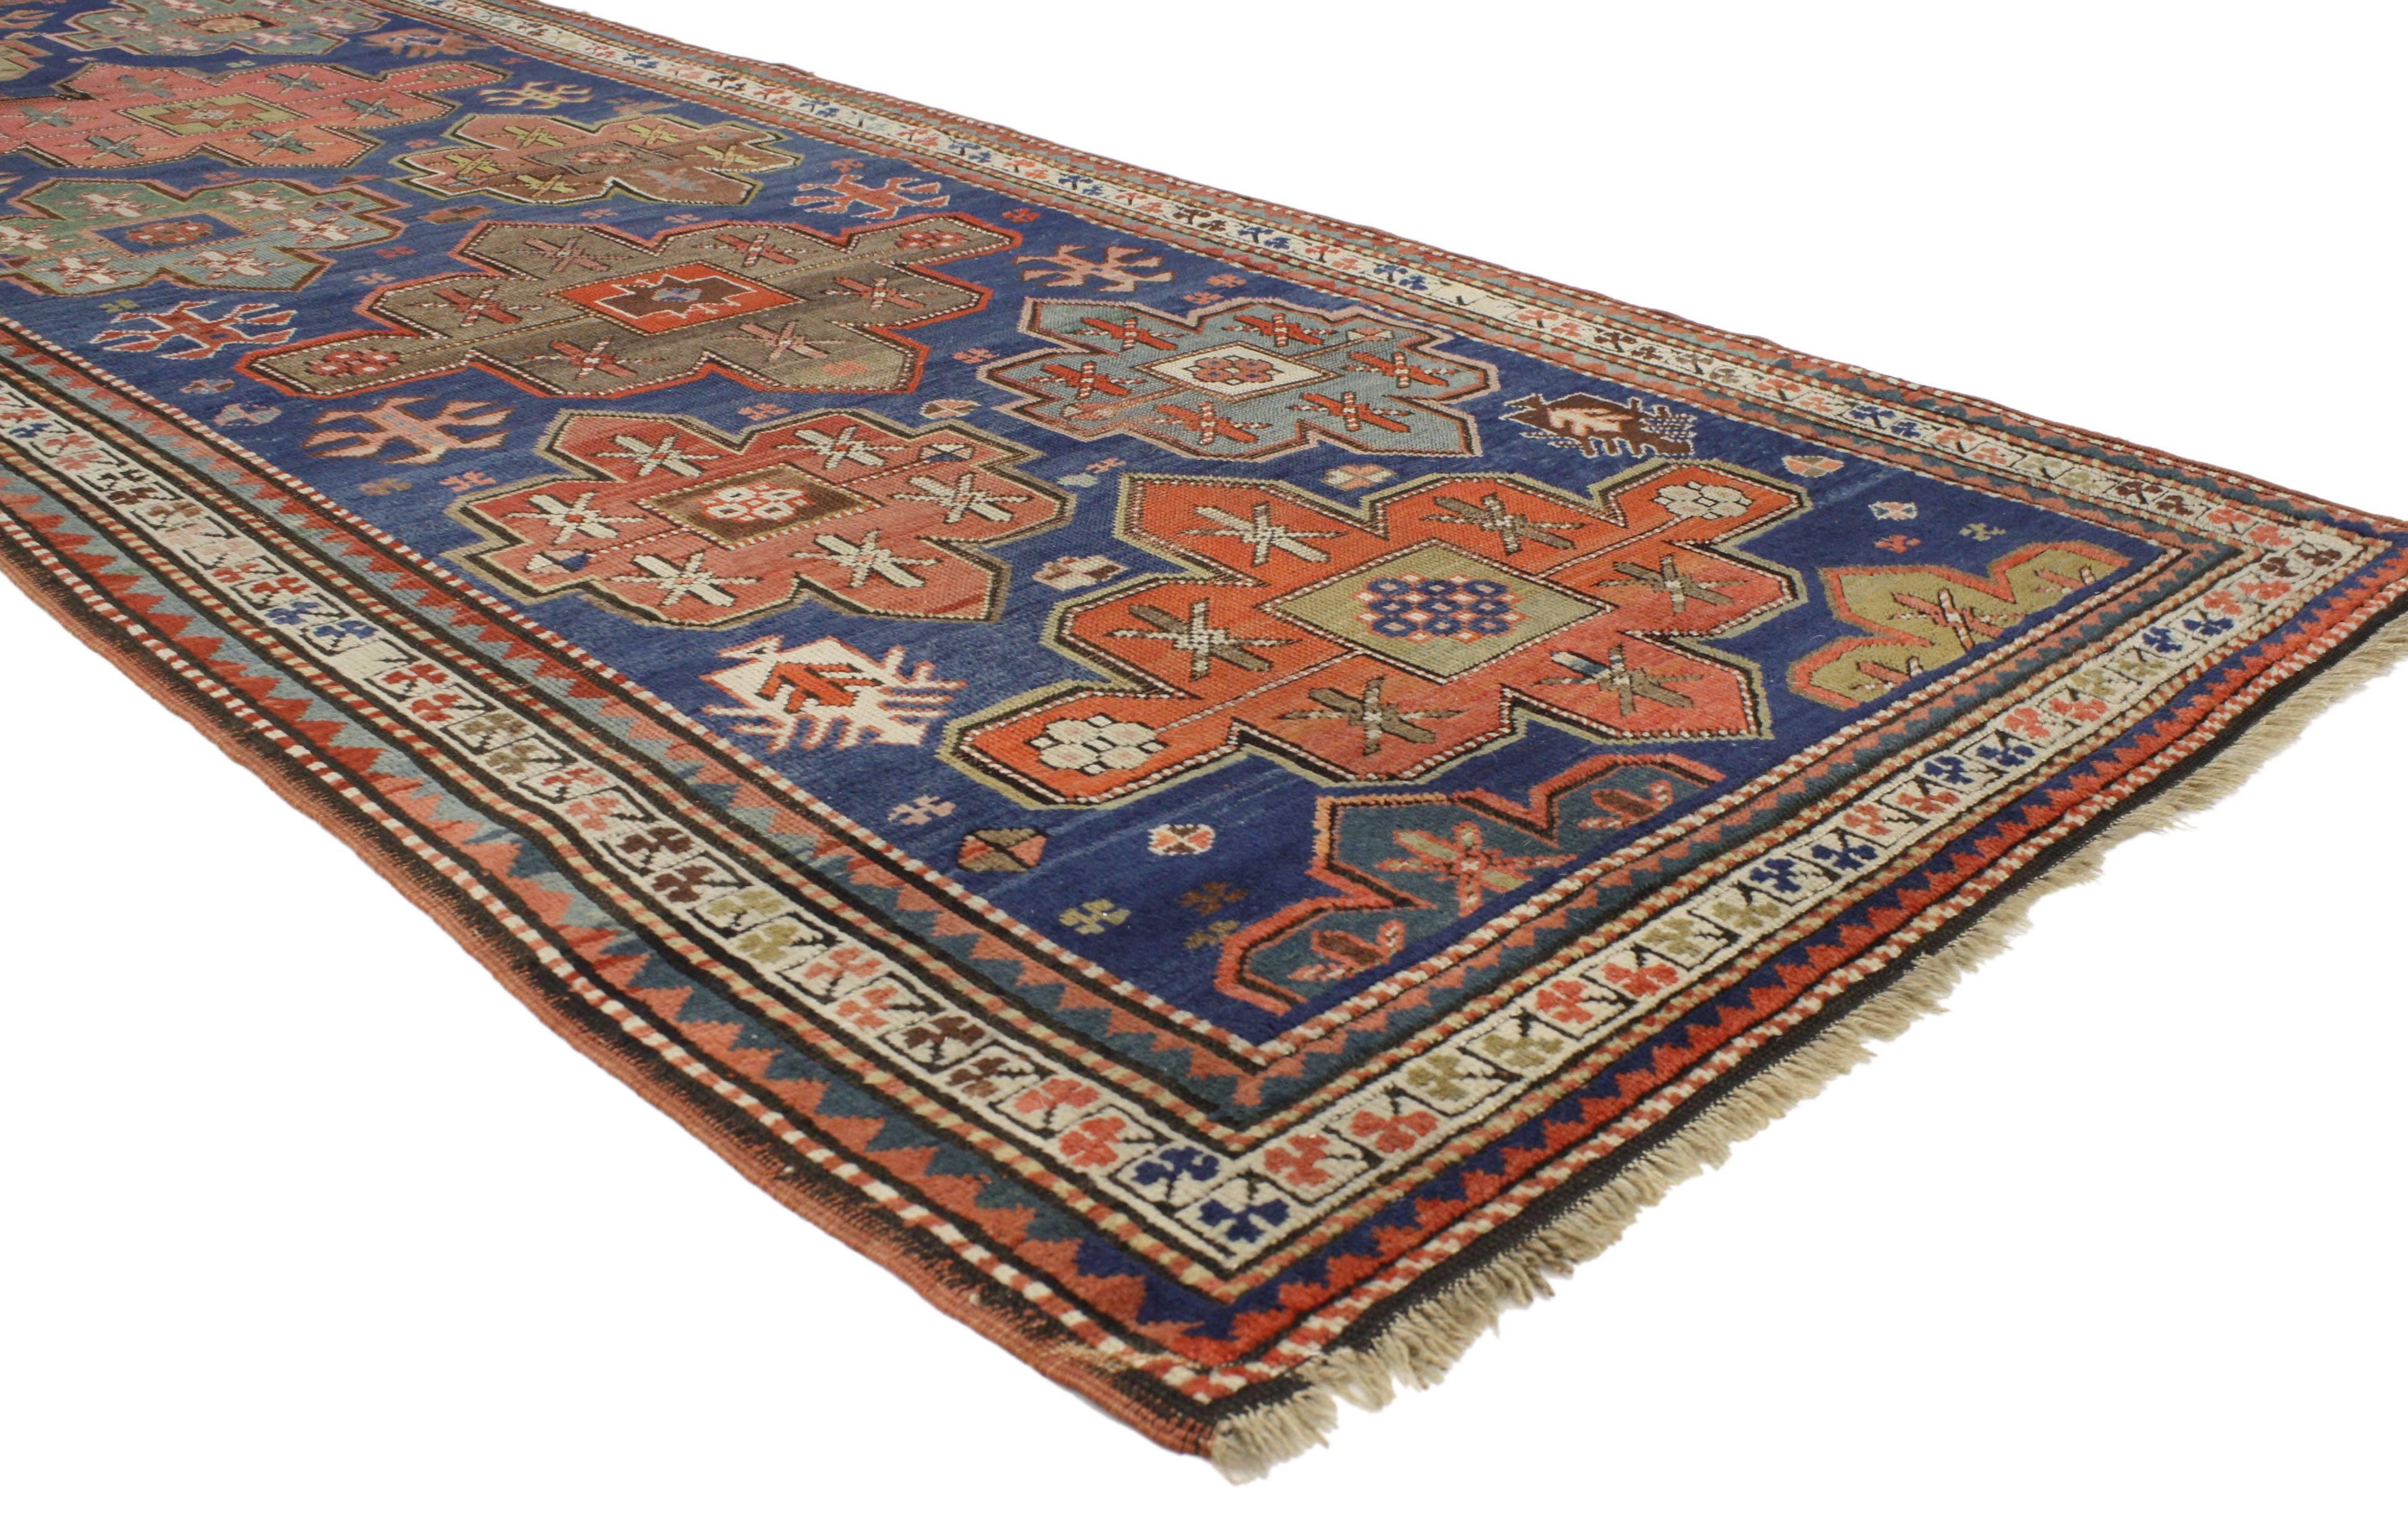 This antique Russian Kazak gallery rug with modern tribal style communicates some of the finer and more important points of geometric design elements. Classically composed and displaying rich waves of abrash, this antique Kazak rug features large